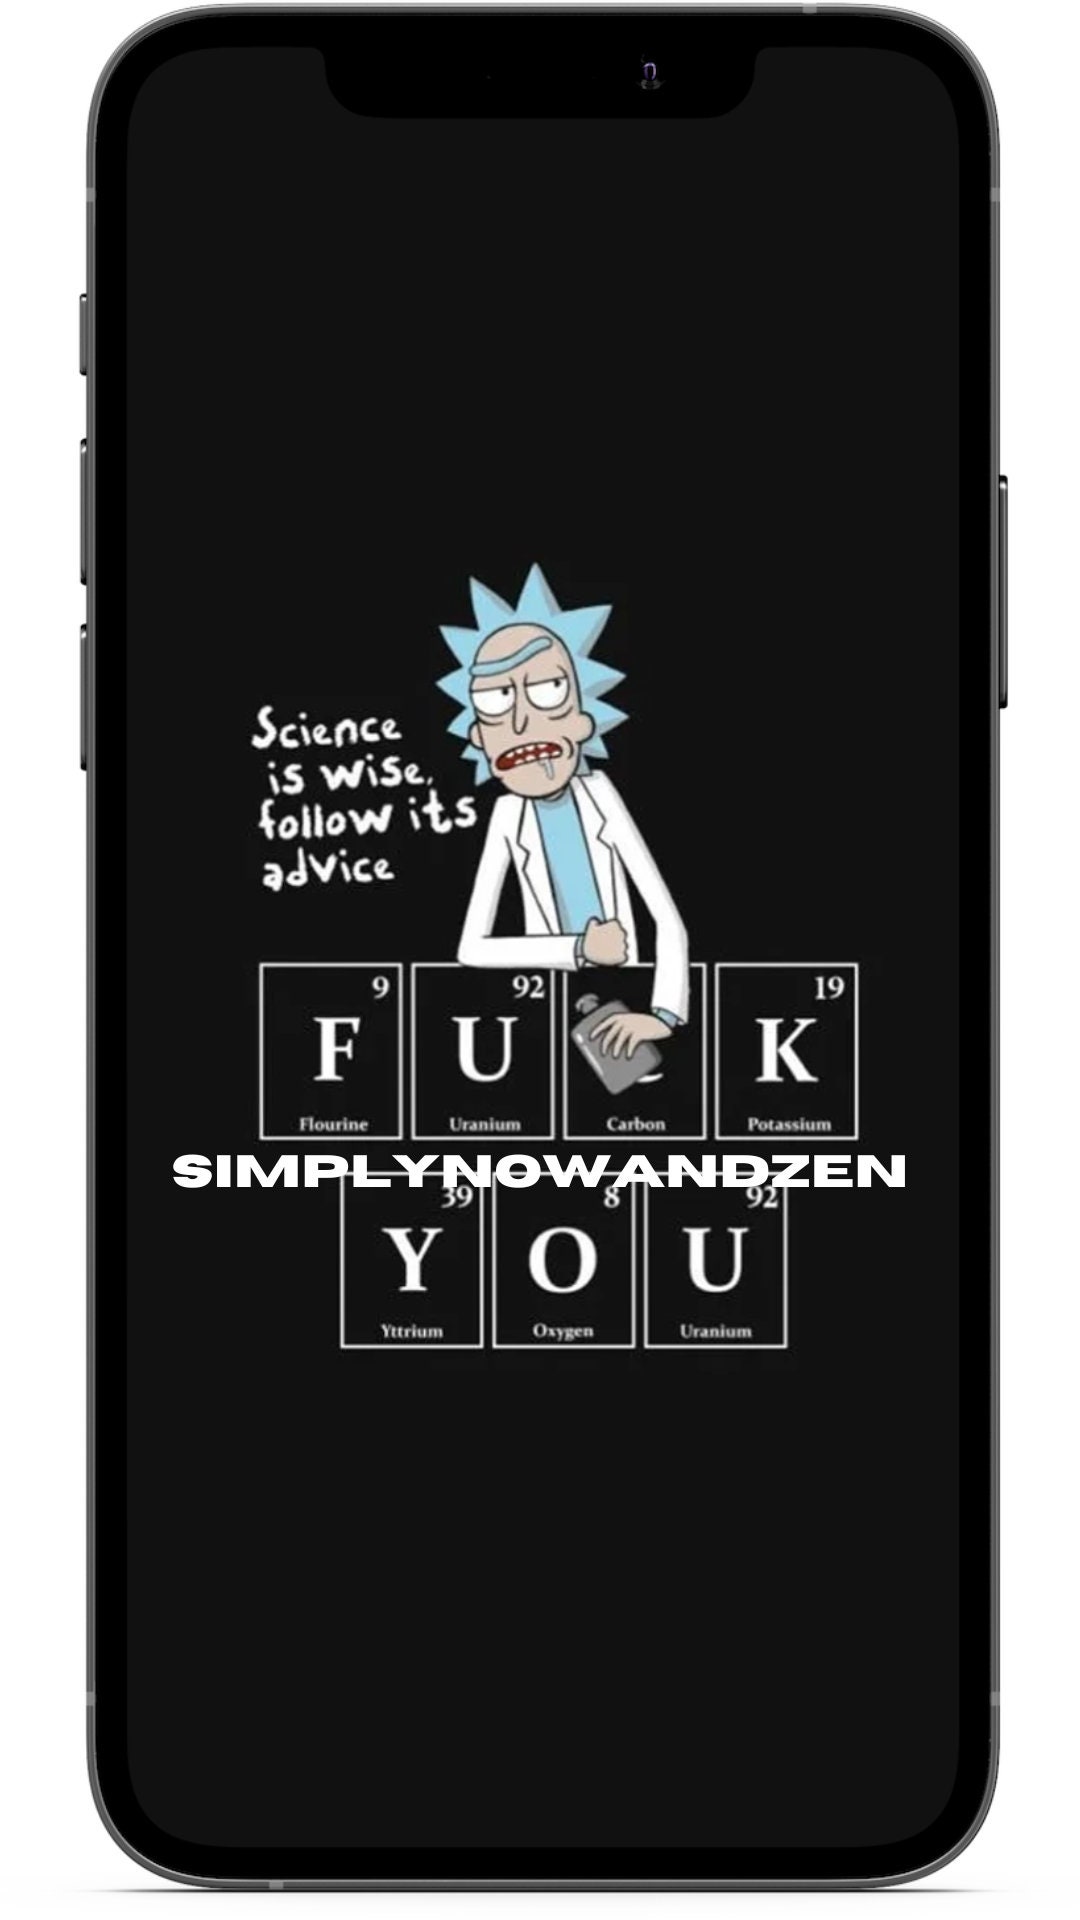 Cool Rick and Morty iPhone Wallpaper, Black Wallpaper, Fun Wallpaper, Moody  Wallpaper, Android Ios iPad Theme, Aesthetic Background -  Norway